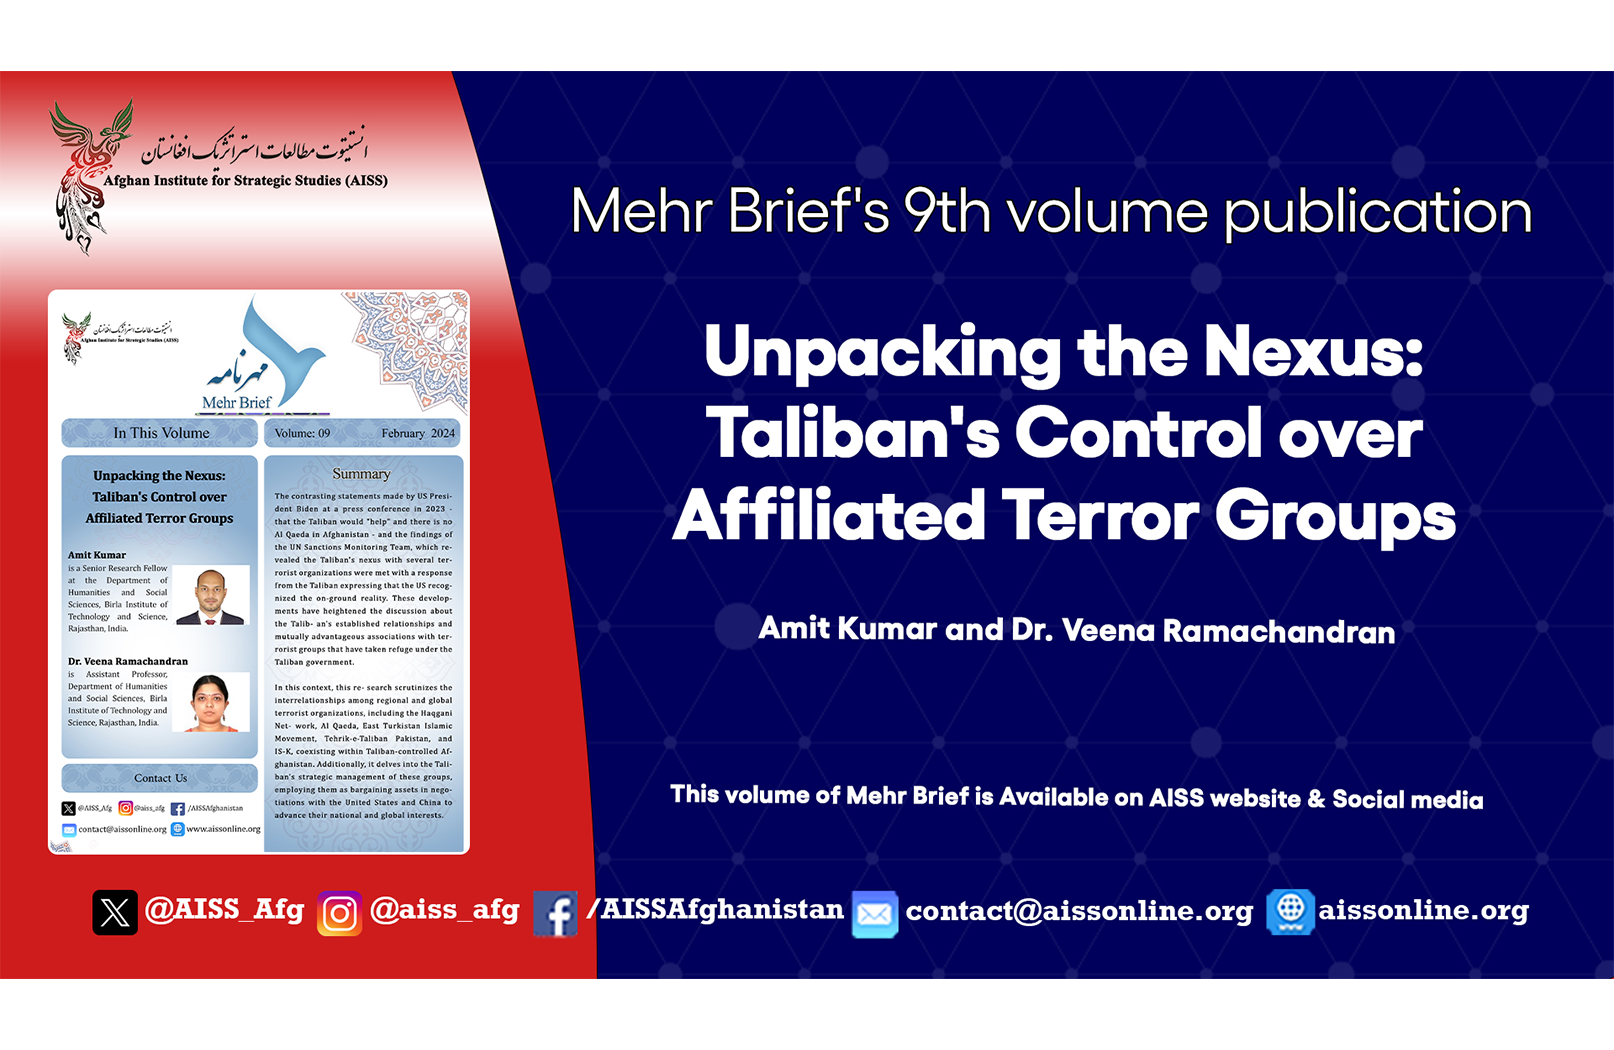 <p><strong>Unpacking the Nexus: Taliban&#39;s Control over Affiliated Terror Groups</strong></p>